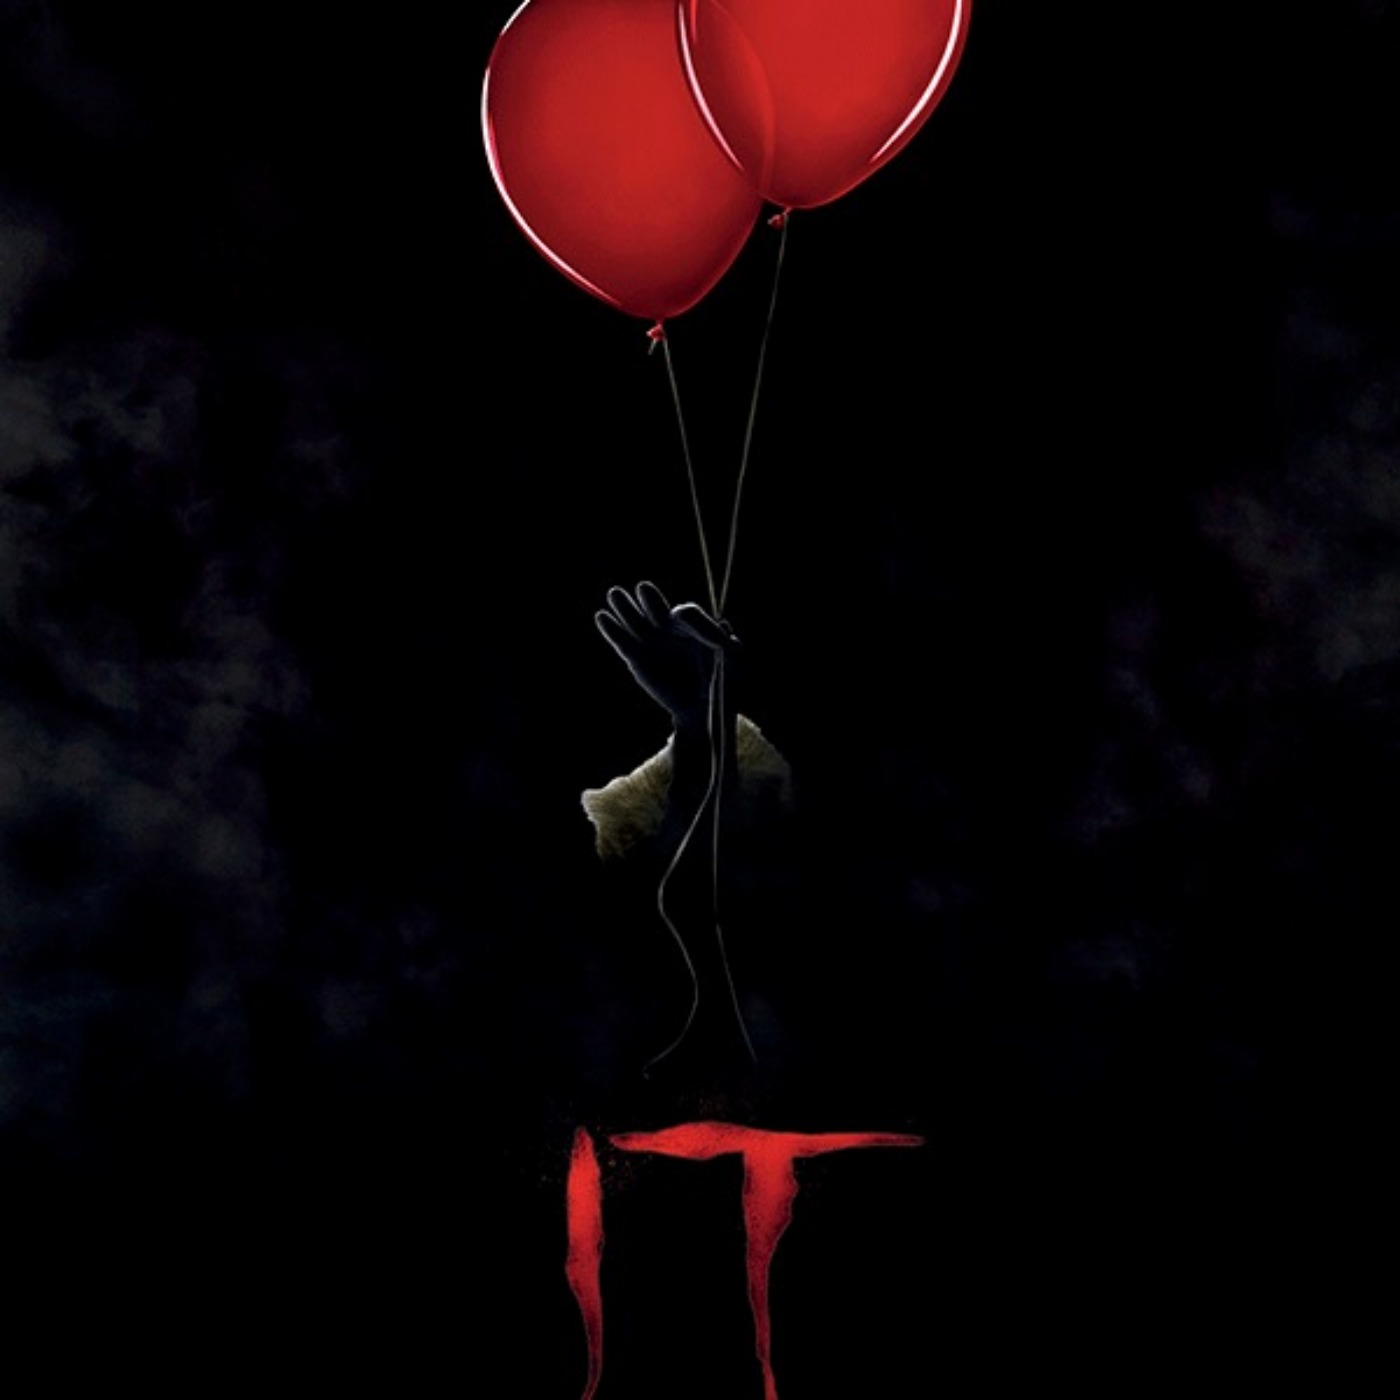 59. You'll Float, Two: IT Chapter 2